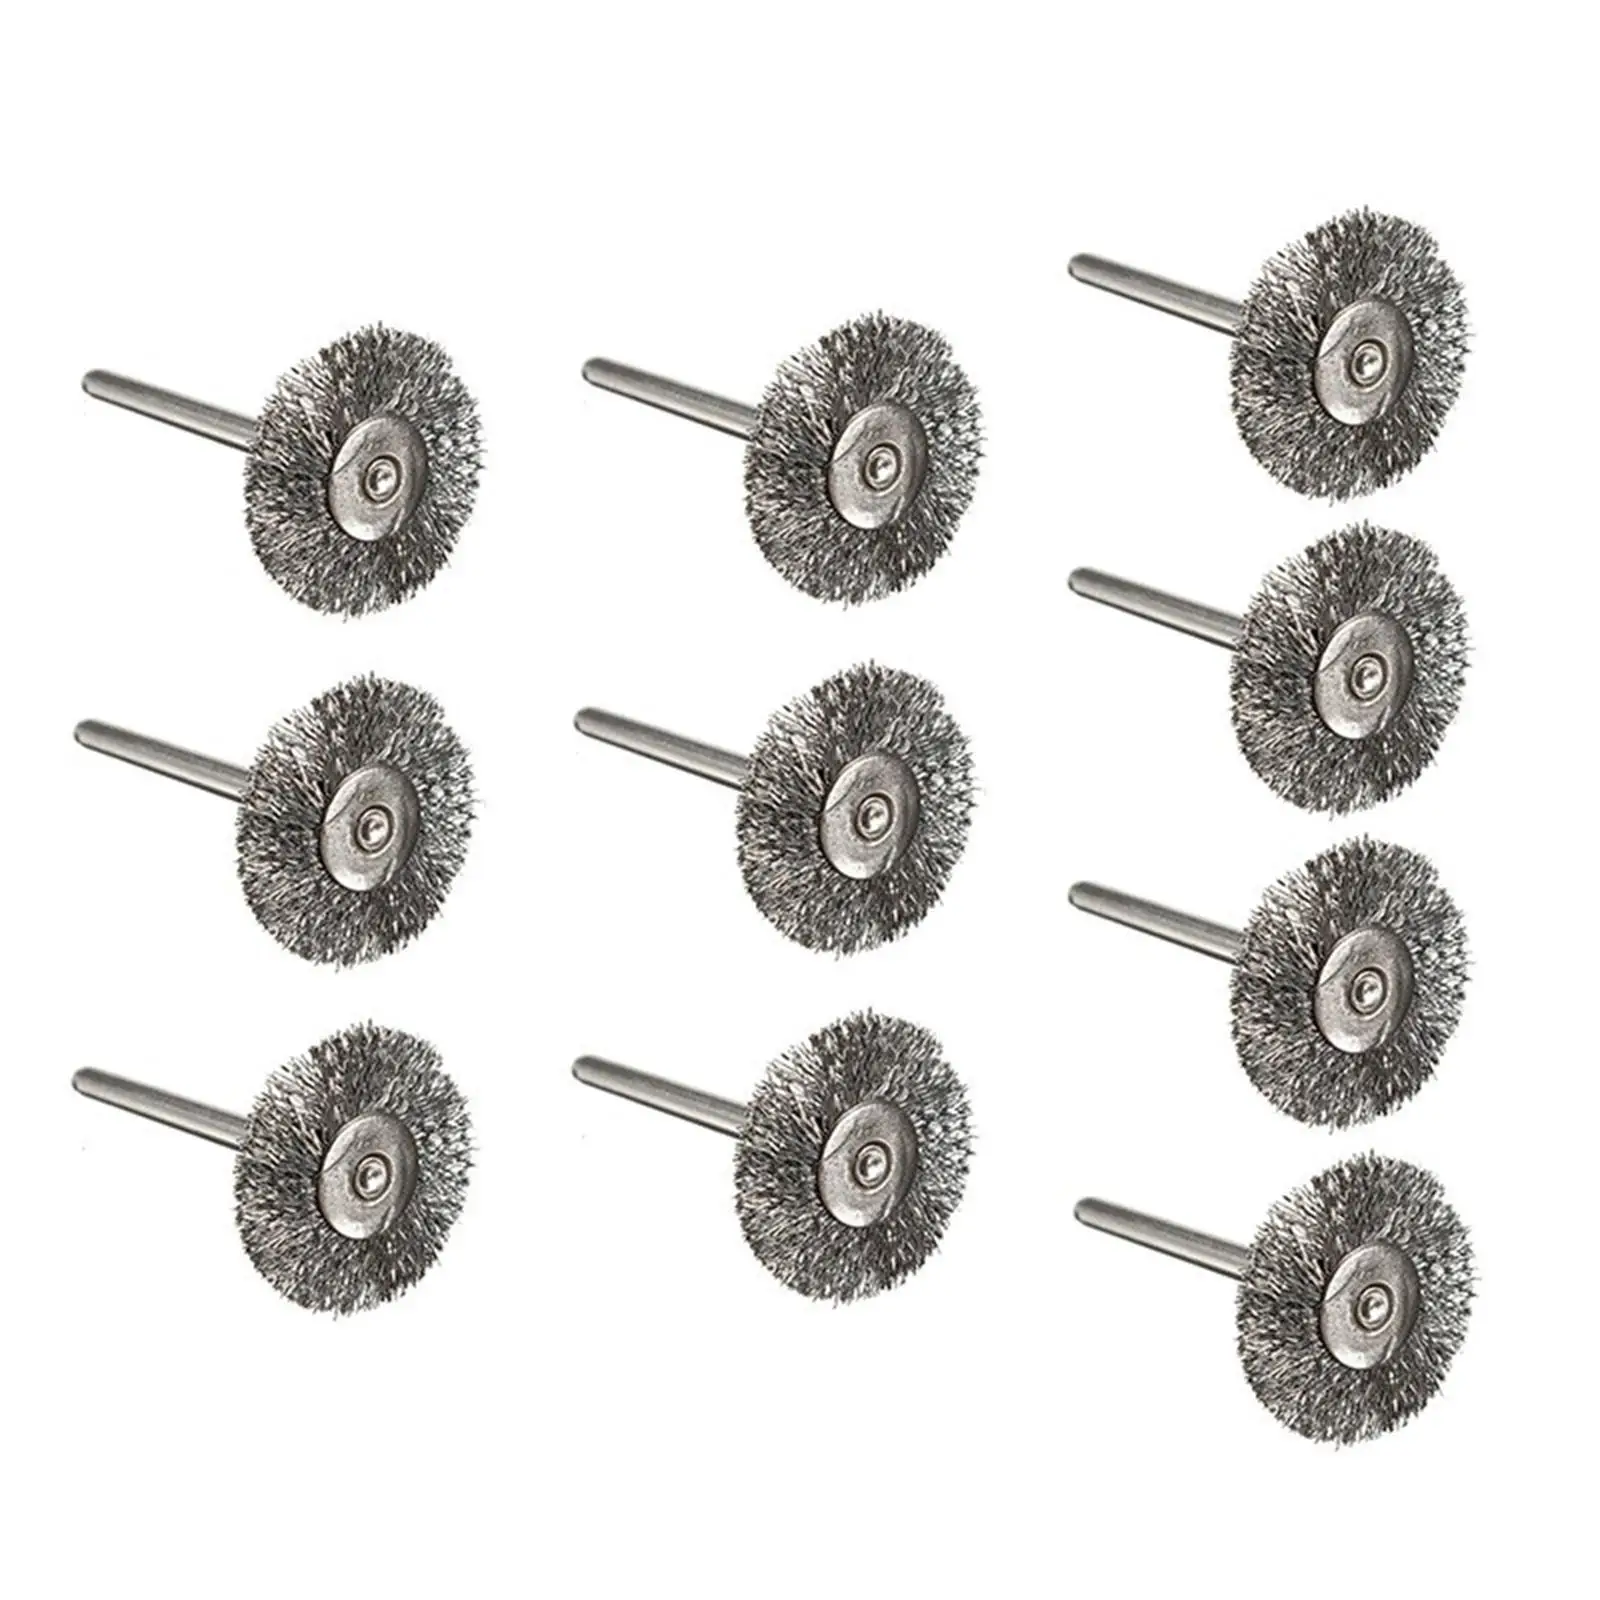 10x 2.2cm Steel wire Brush for Drill Coarse Crimped Brush Replacement